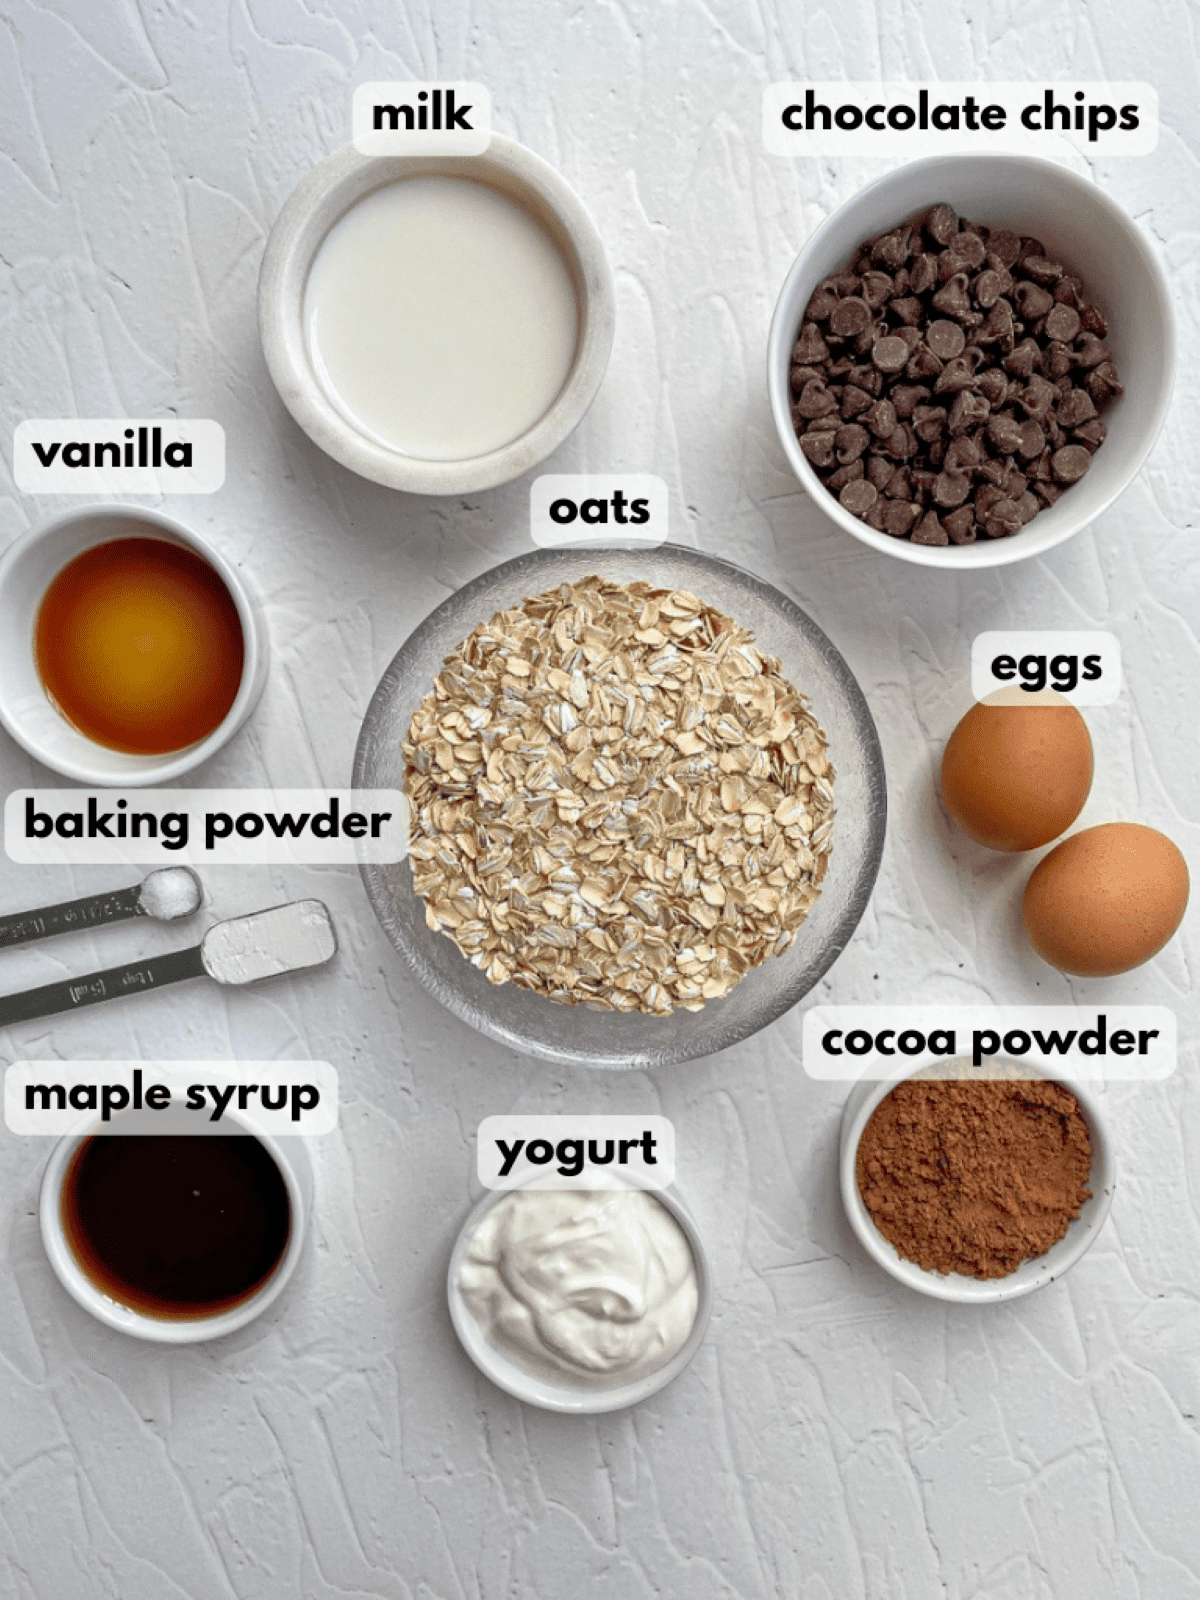 Chocolate Baked Oatmeal Ingredients: oats, milk, eggs, chocolate chips, cocoa powder, yogurt, vanilla extract, maple syrup, and baking powder.